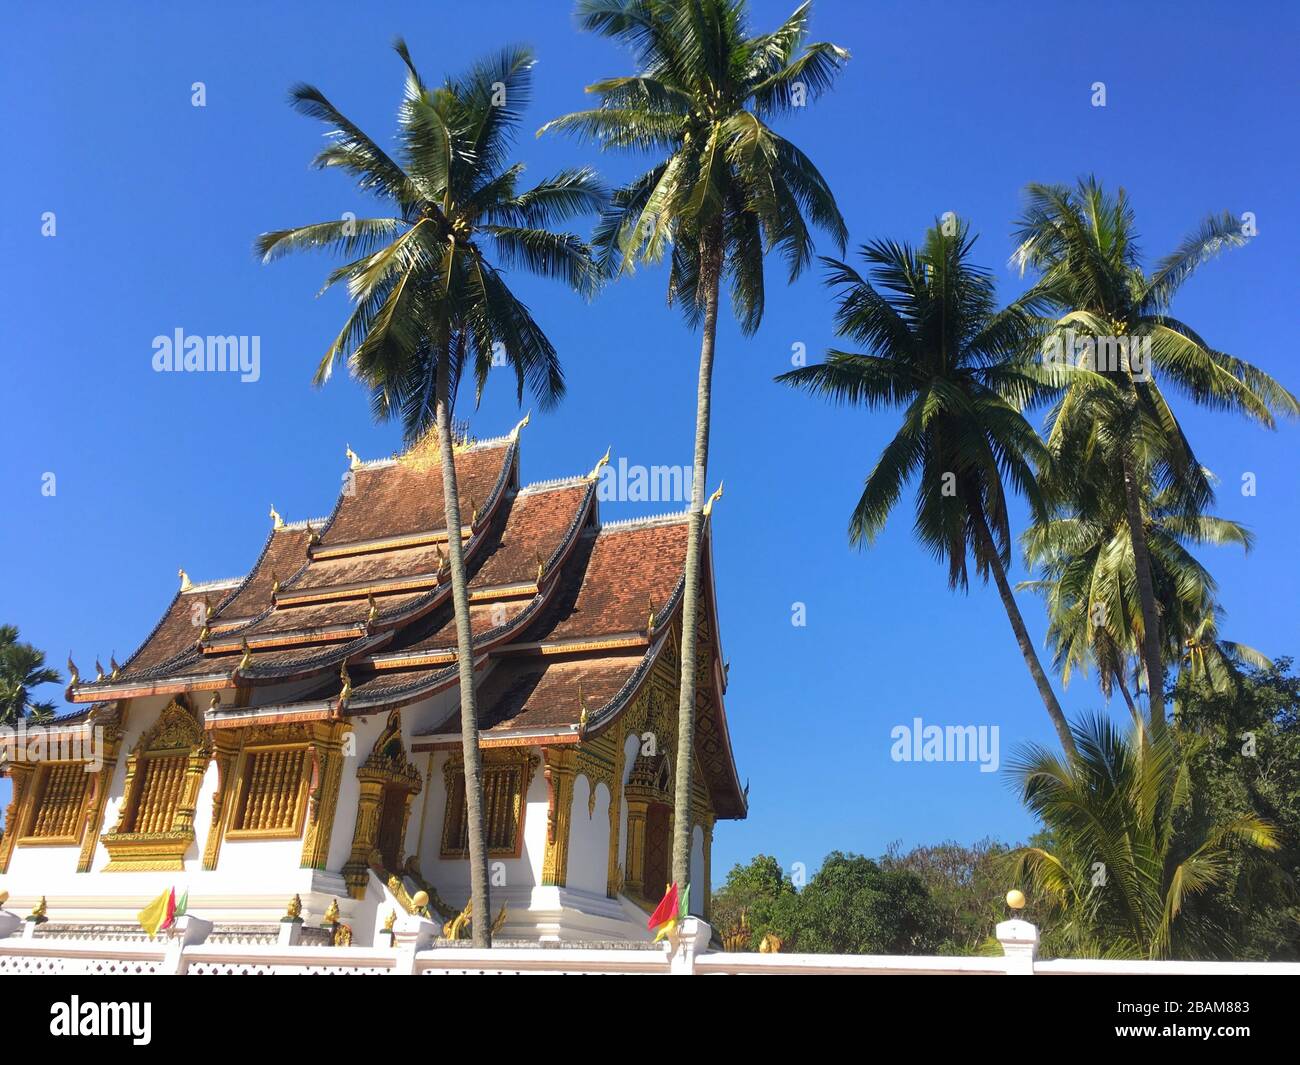 Laos Traditional Buddhist Temple with Big Palm Trees in Luang Prabang, Laos Republic Stock Photo